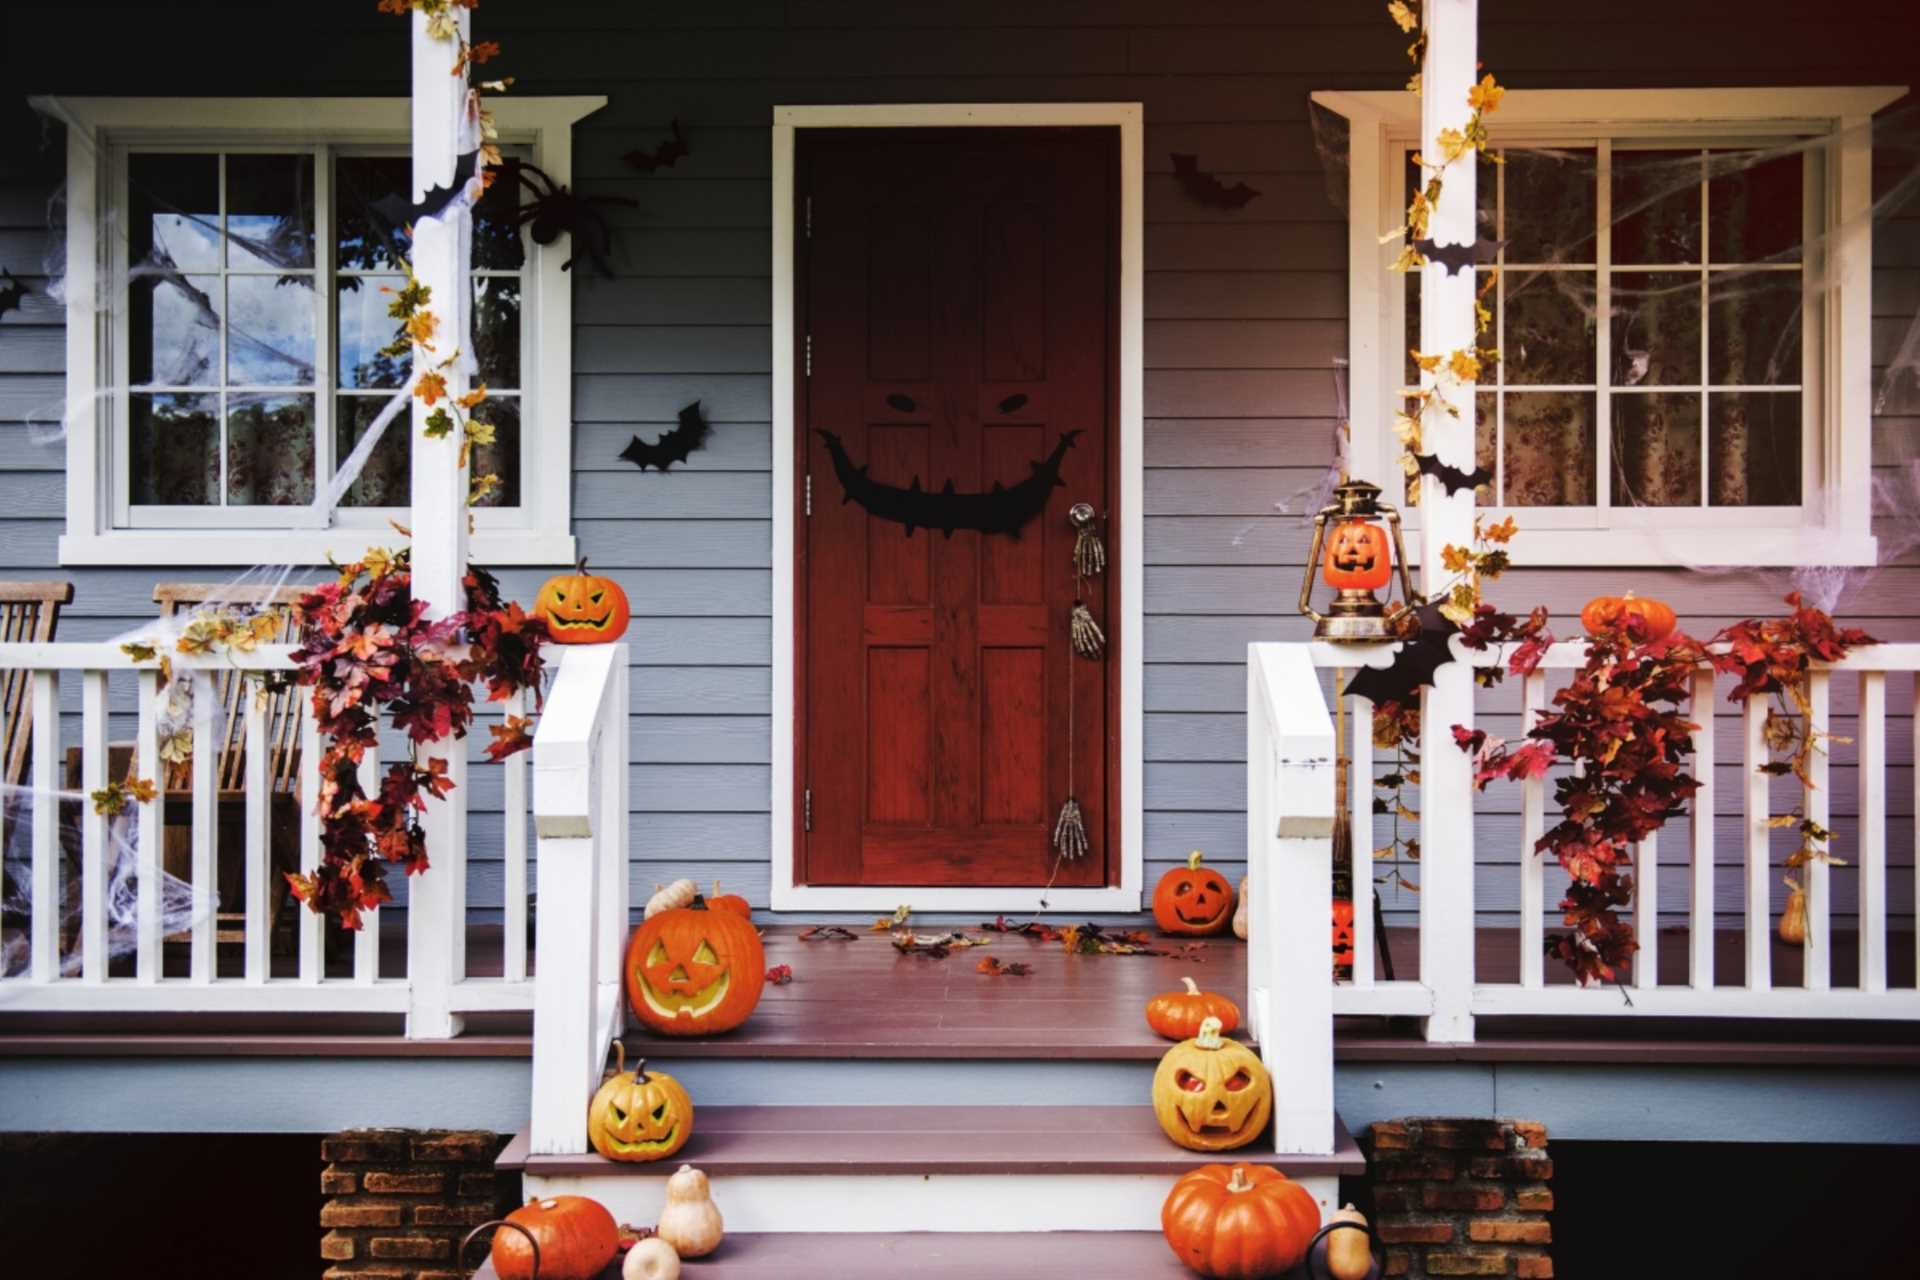 Don`t be scared of decorating your home for Halloween